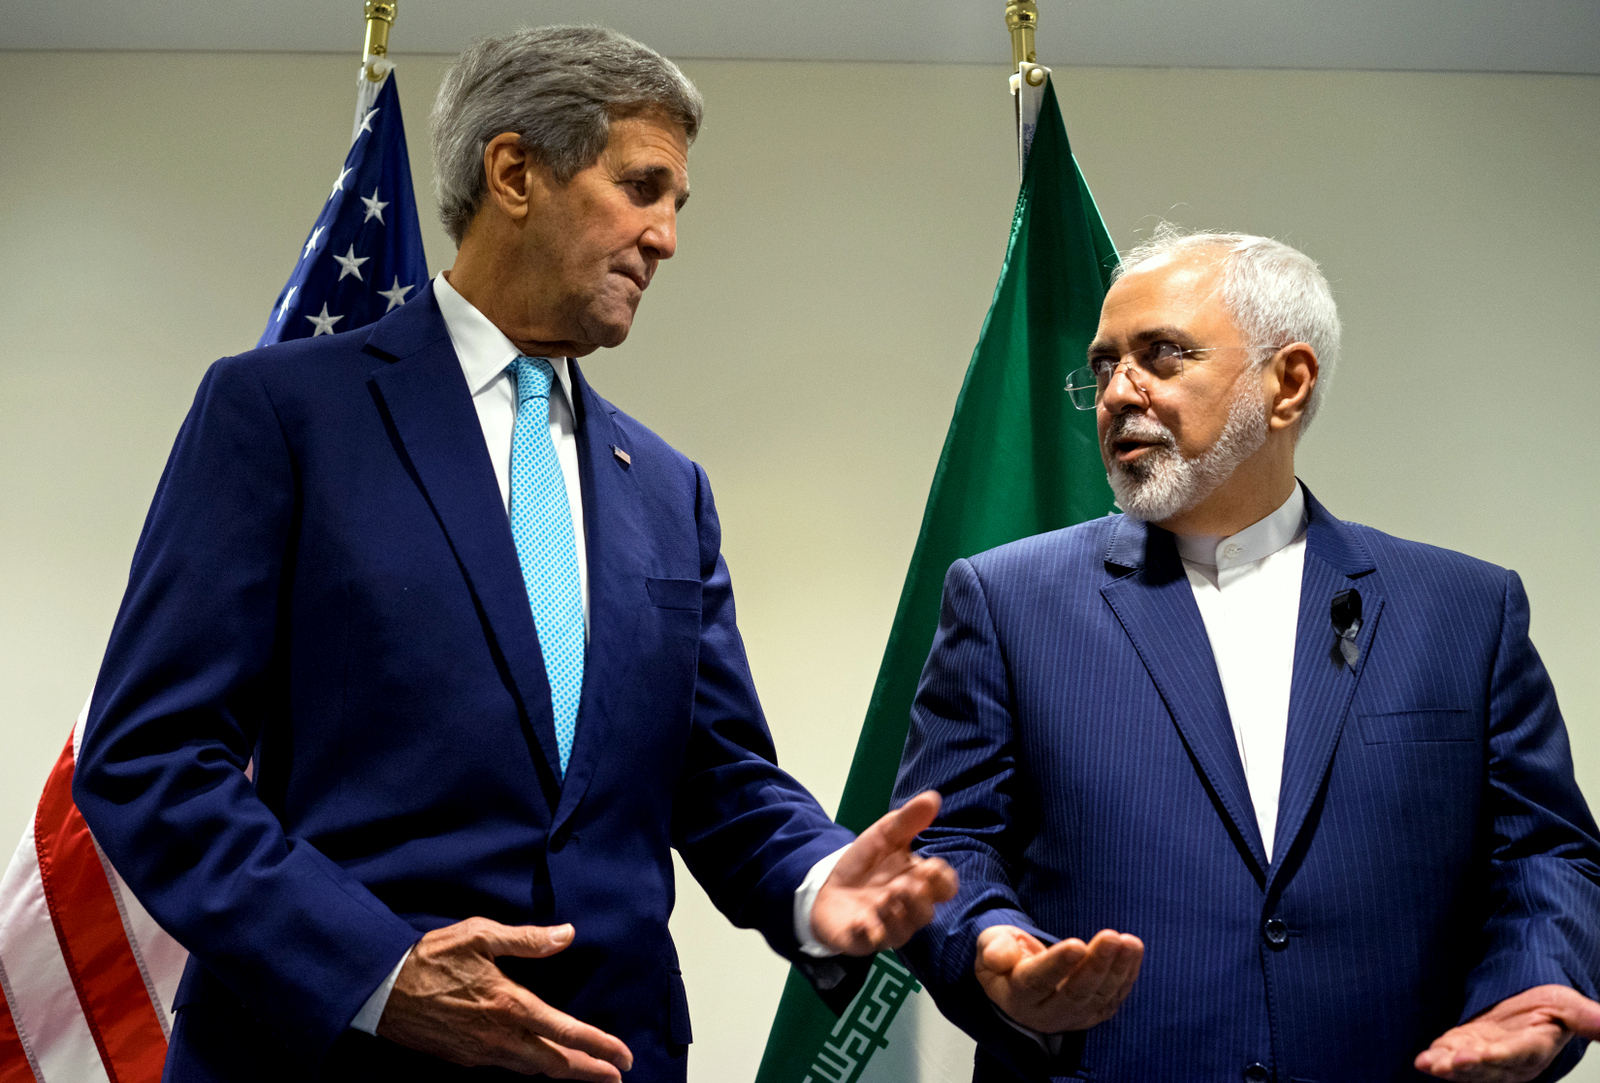 US Secretary of State John Kerry, left, meets with Iranian Foreign Minister Mohammad Javad Zarif at United Nations headquarters. Iran sits down with the United States, Russia, Europeans and key Arab states for the first time since the Syrian civil war began to discuss the future of the war-torn country. It will also break ground by bringing President Bashar Assad’s main supporter, Iran, to the same table as its regional rivals, including Turkey and Saudi Arabia, who have been backing many of the insurgent groups. (AP Photo/Craig Ruttle)